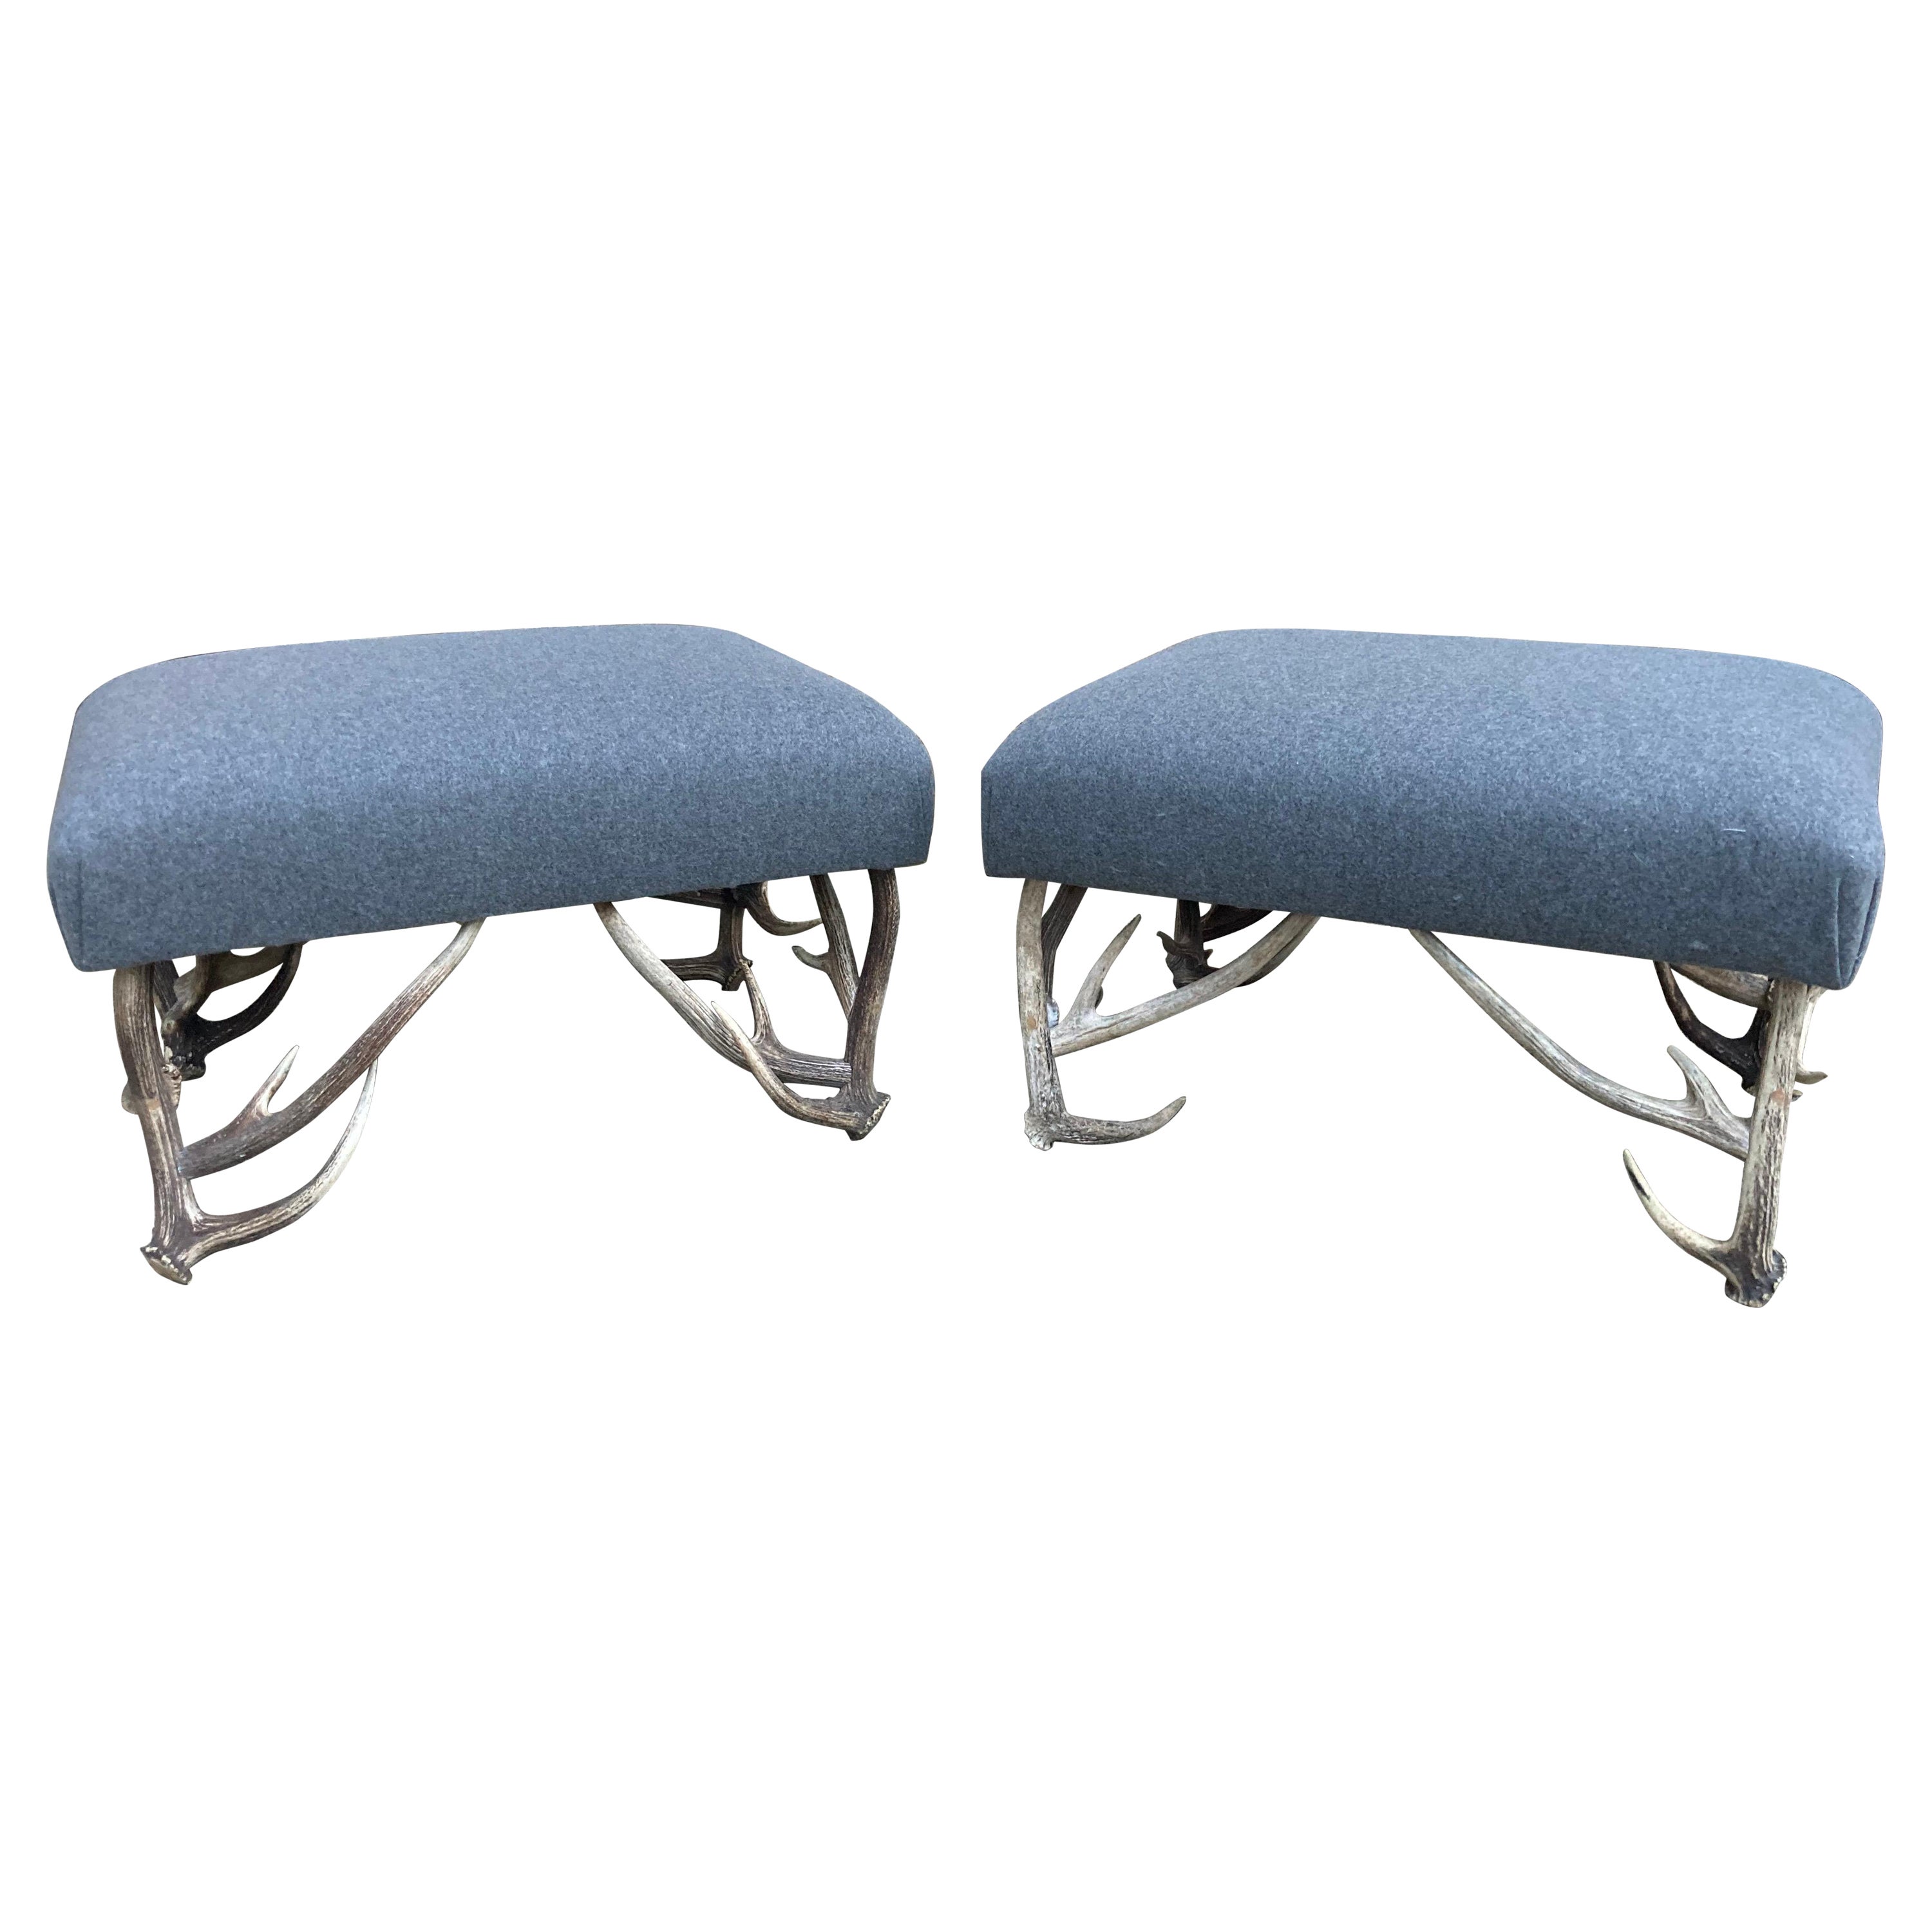 Pair of Deer Antler Upholstered Ottomans / Benches